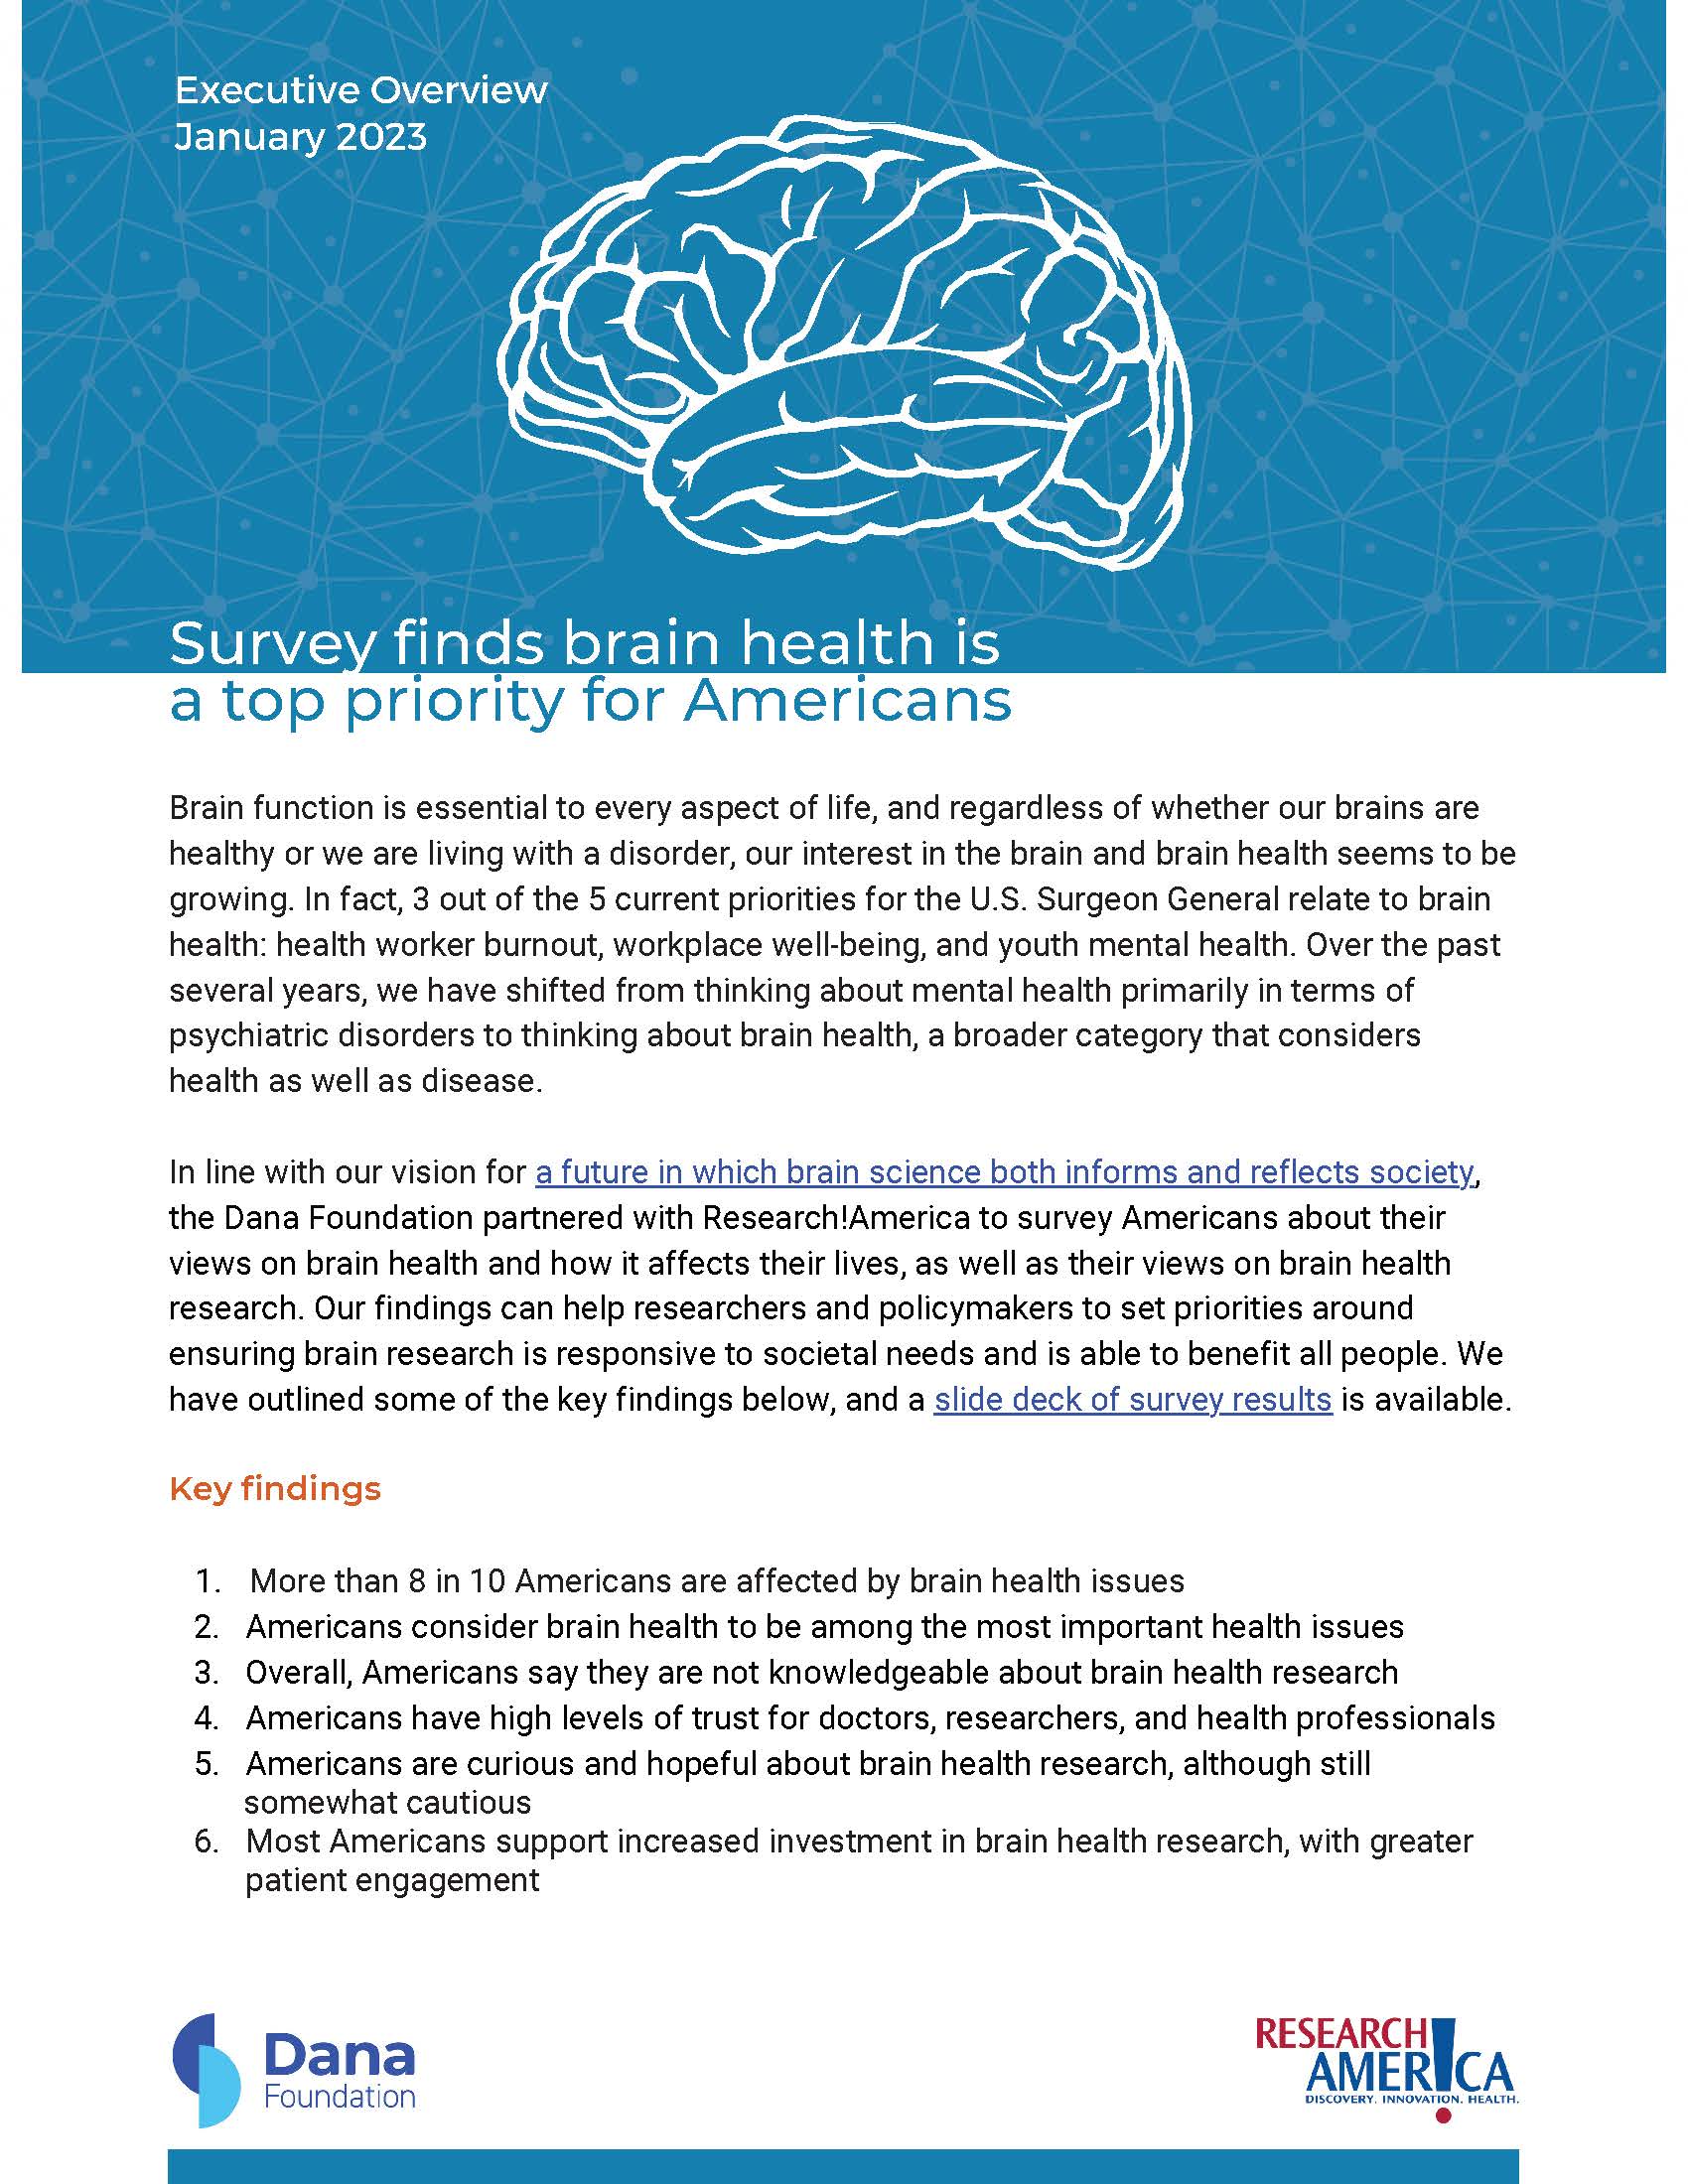 Survey Finds Brain Health is a Top Priority for Americans - Dana Foundation